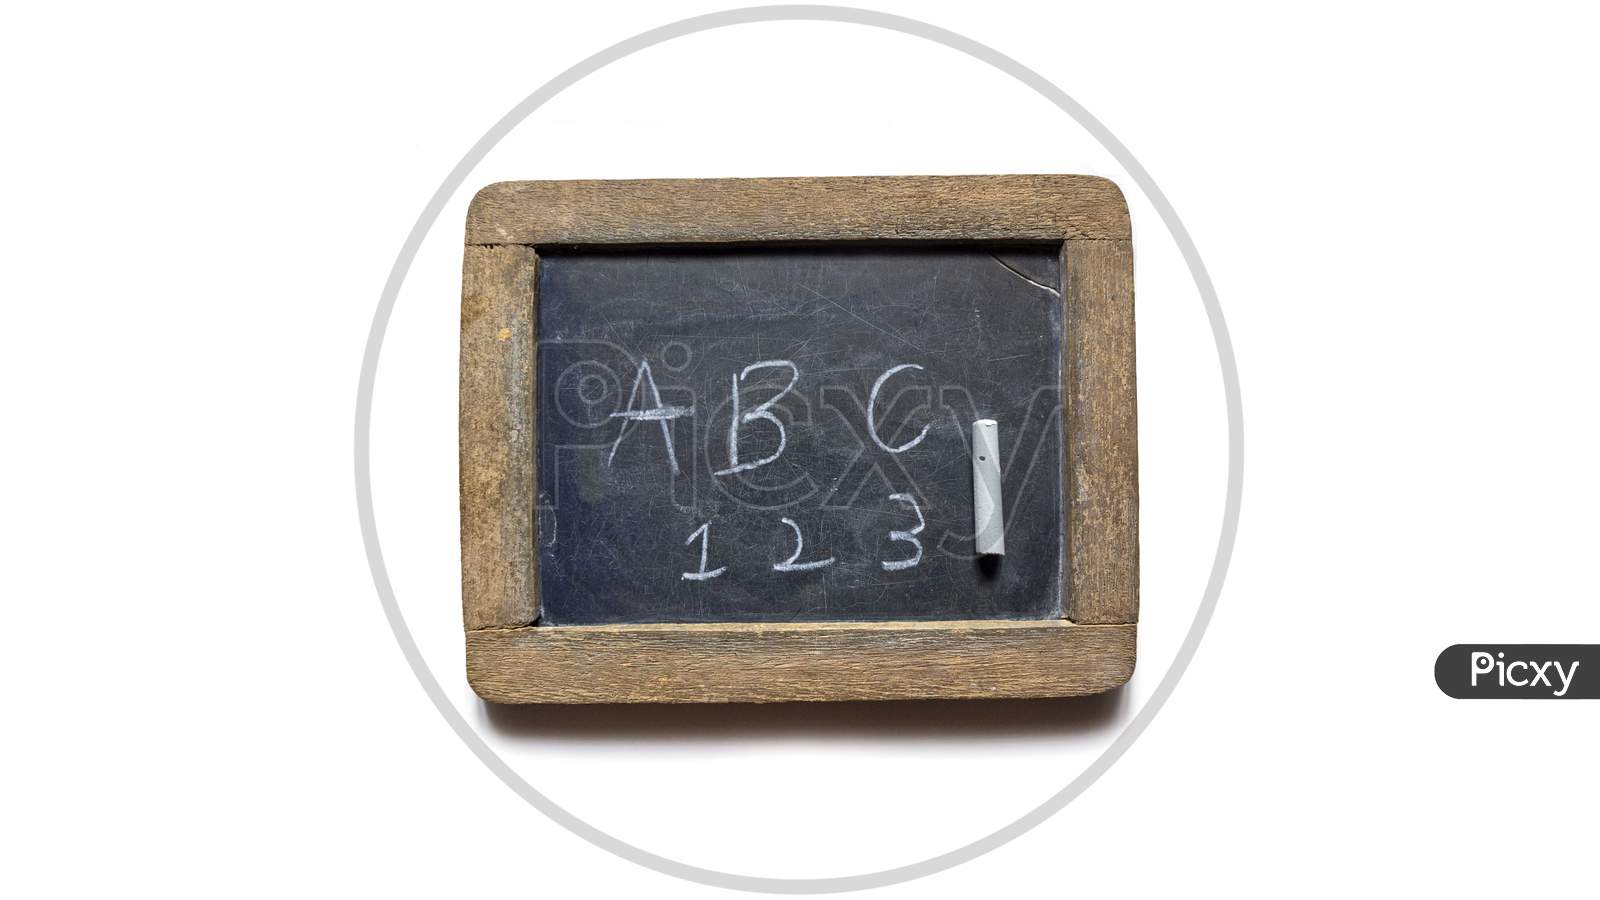 Wooden Slate Slate With Letters And Numbers On It